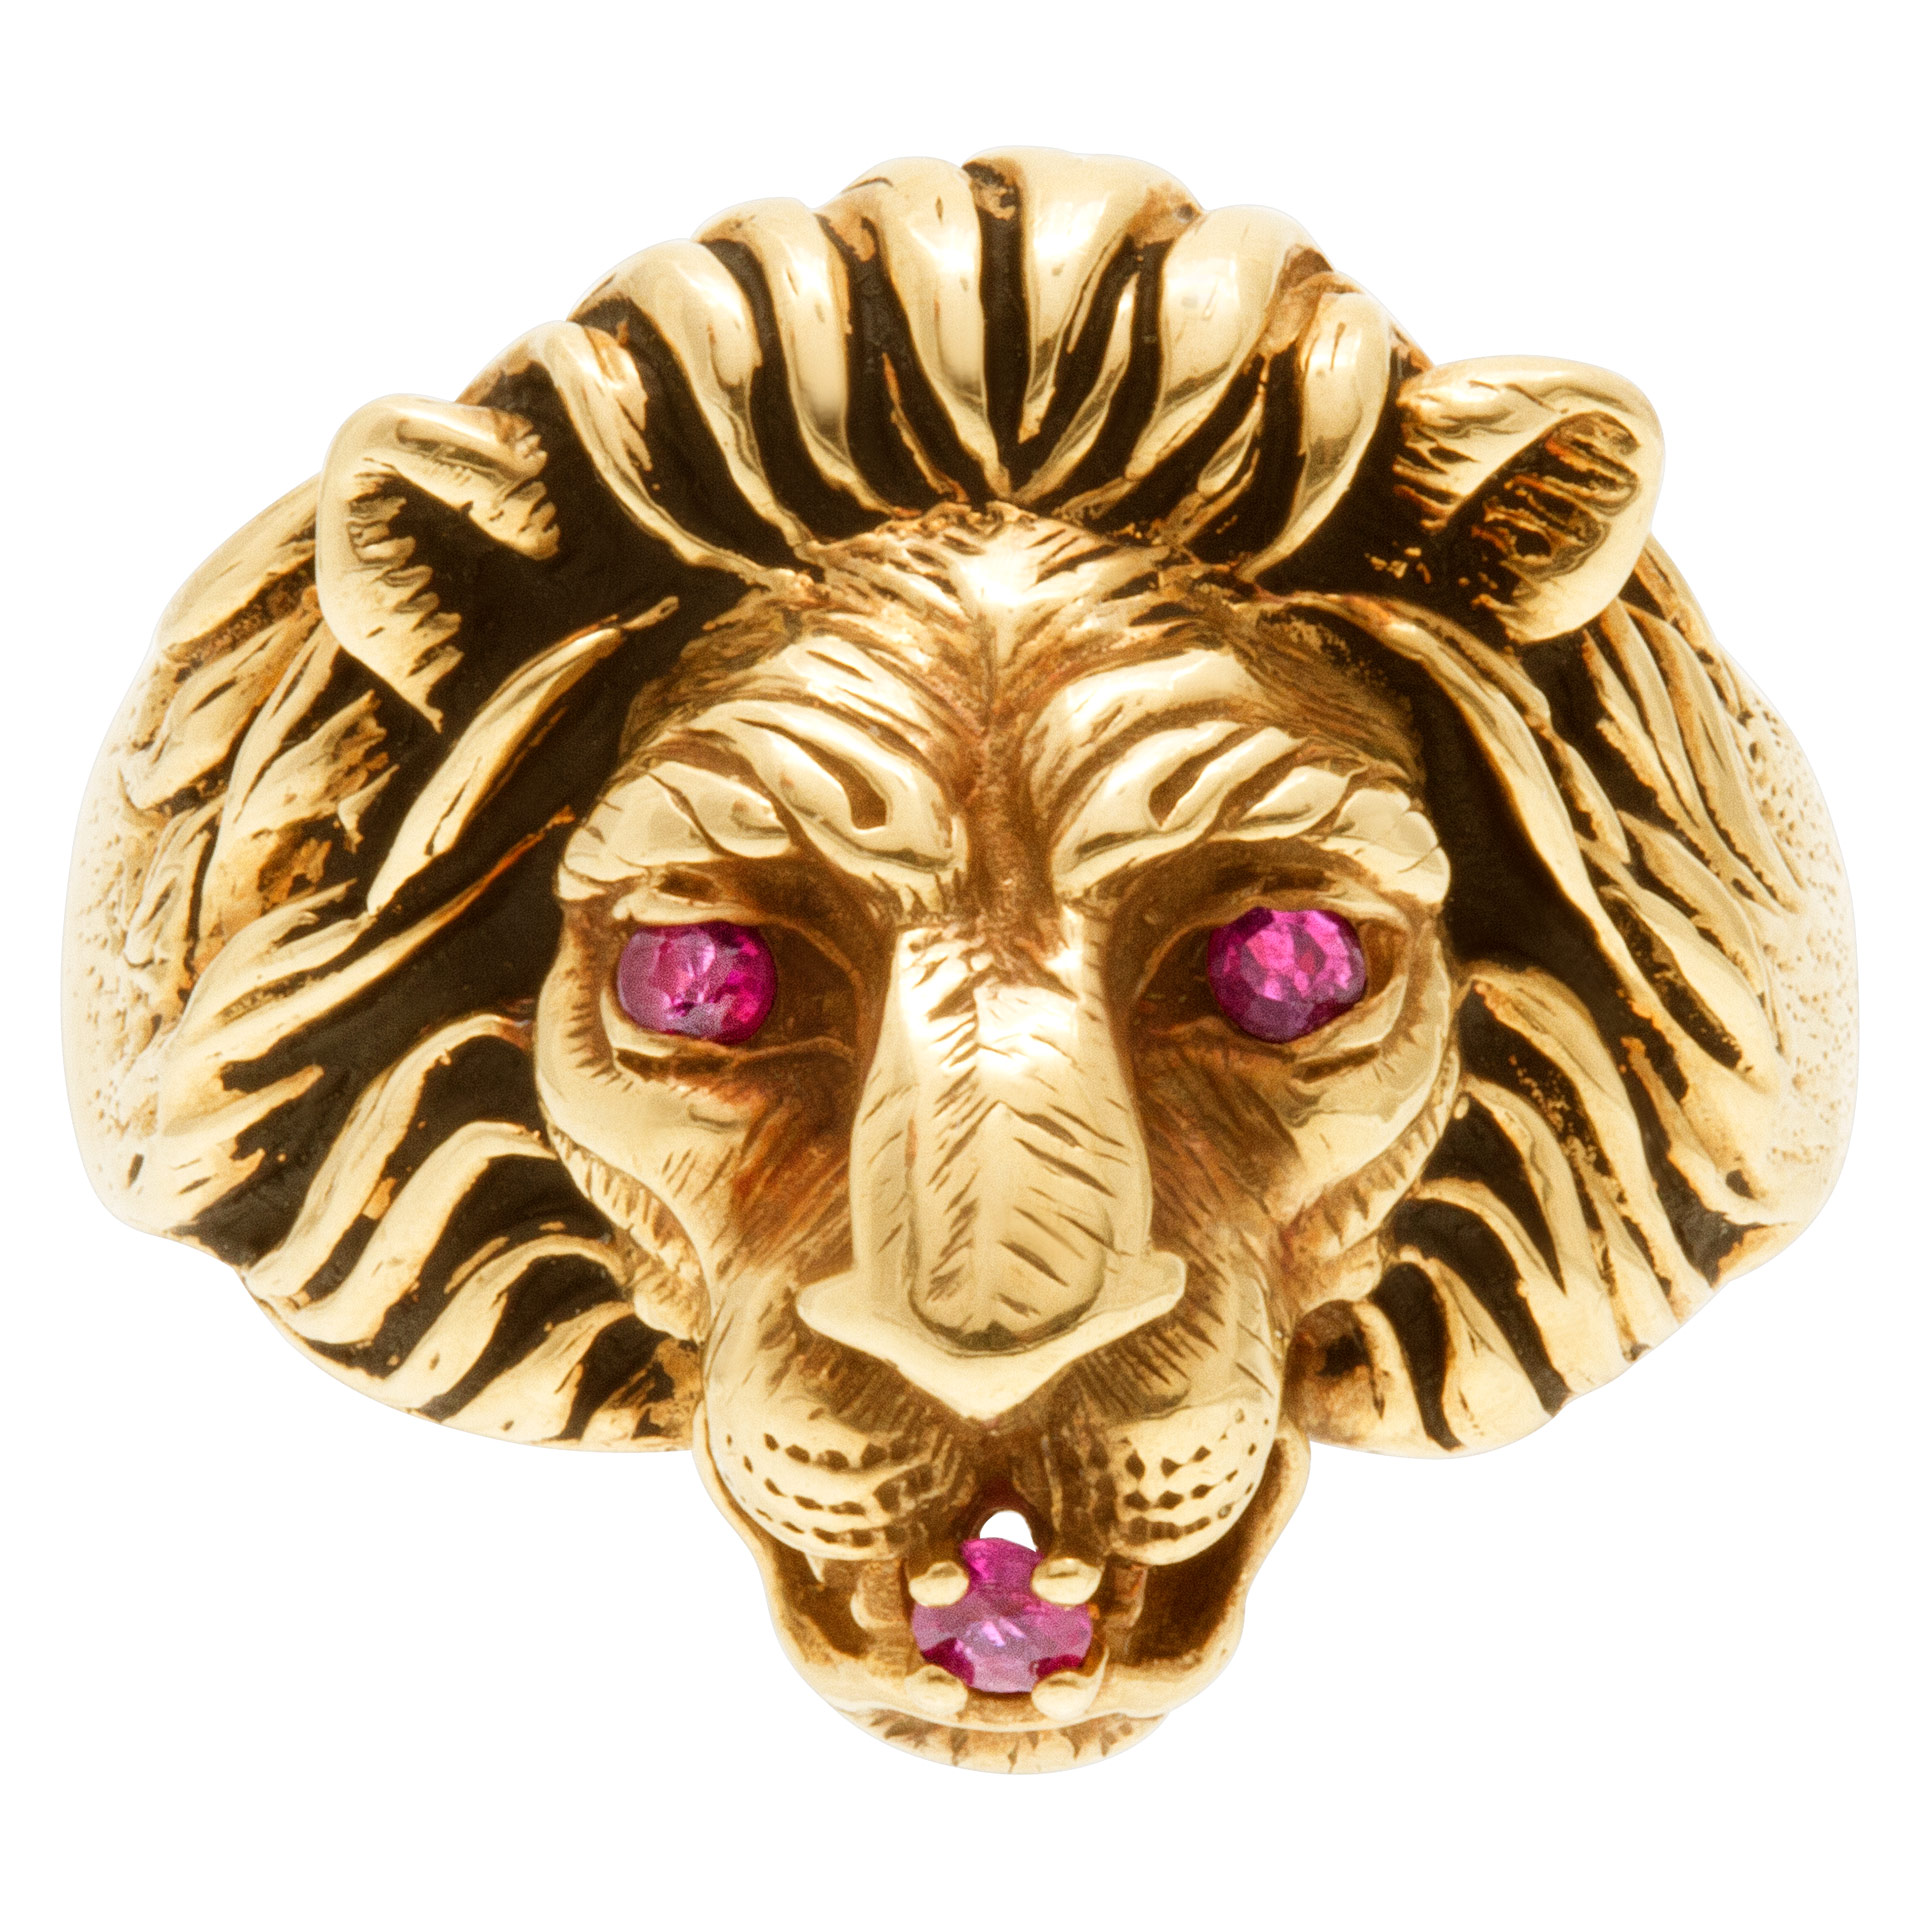 Head of Lion ring with ruby accents in 14k gold